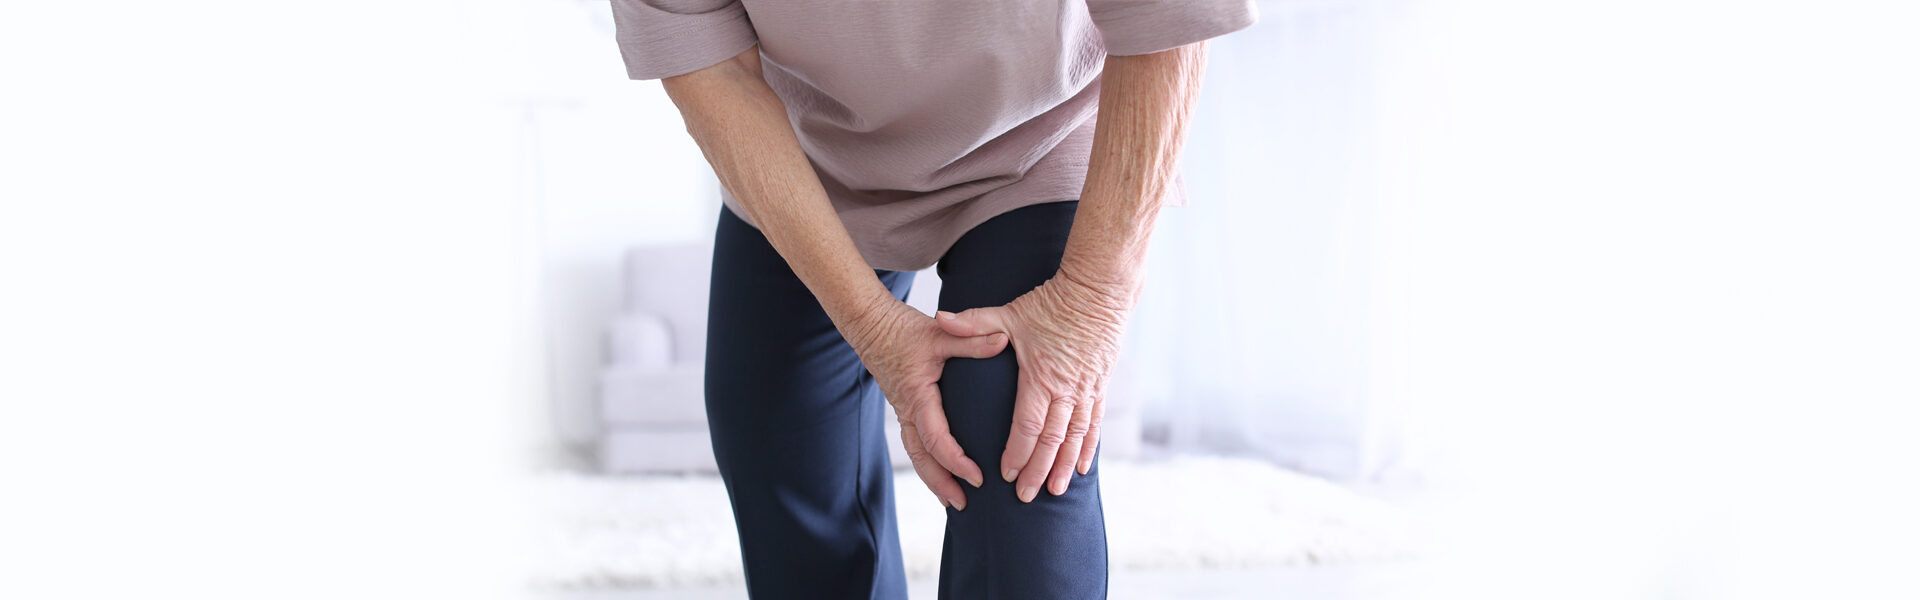 5 Healthy Habits to Foster That Can Help Manage Arthritis